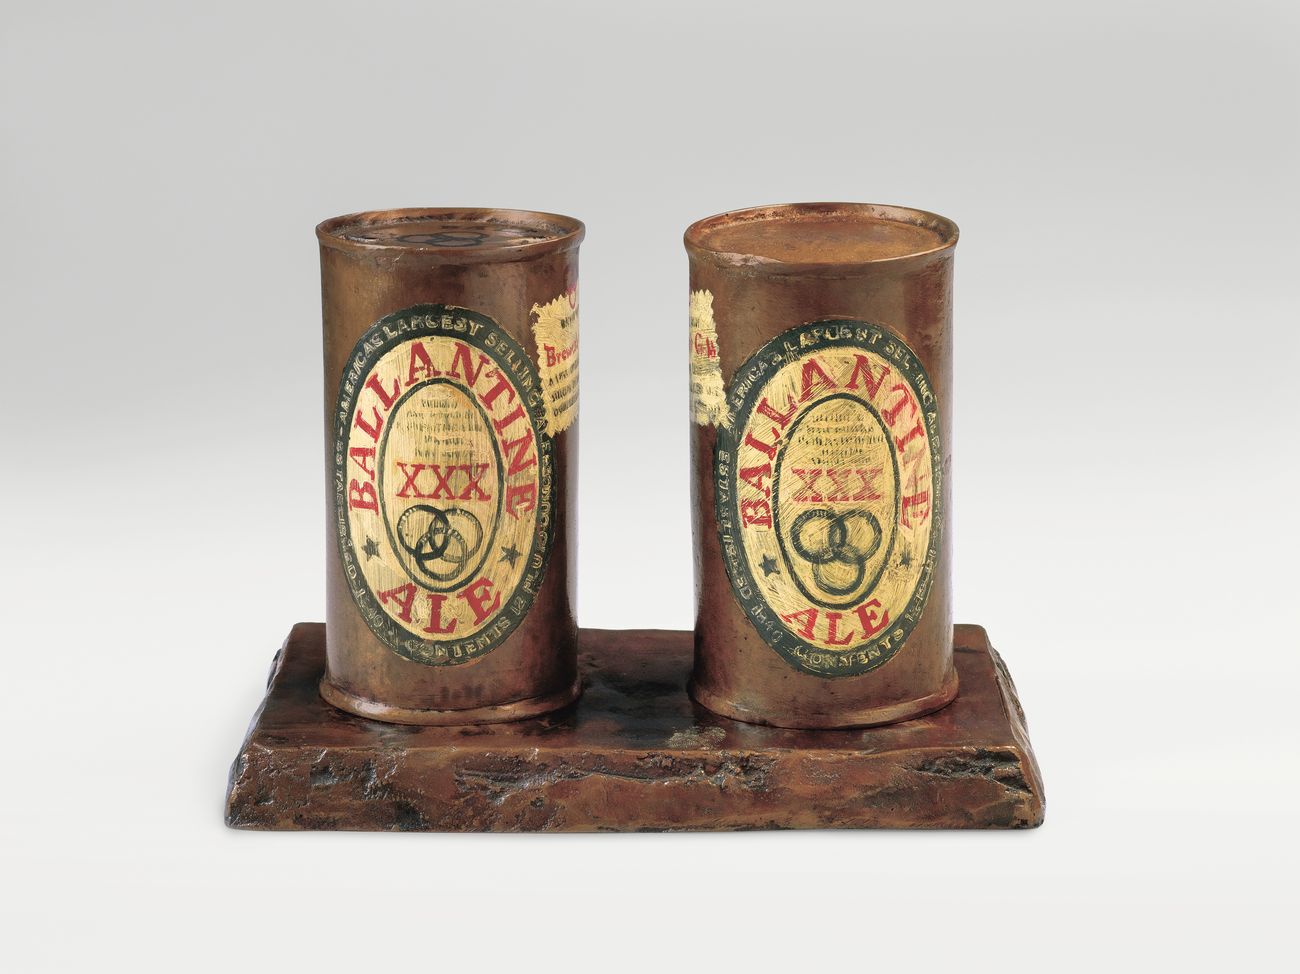 Jasper Johns, Painted Bronze, 1960 (cast and painted in 1964). Bronze and oil paint (3 parts), 5 1/2 × 8 × 4 5/8 in. (14 × 20.3 × 11.8 cm). Edition no. 2/2. Whitney Museum of American Art, New York; purchase with funds from the Leonard A. Lauder Masterpiece Fund. © 2021 Jasper Johns / Licensed by VAGA at Artists Rights Society (ARS), New York